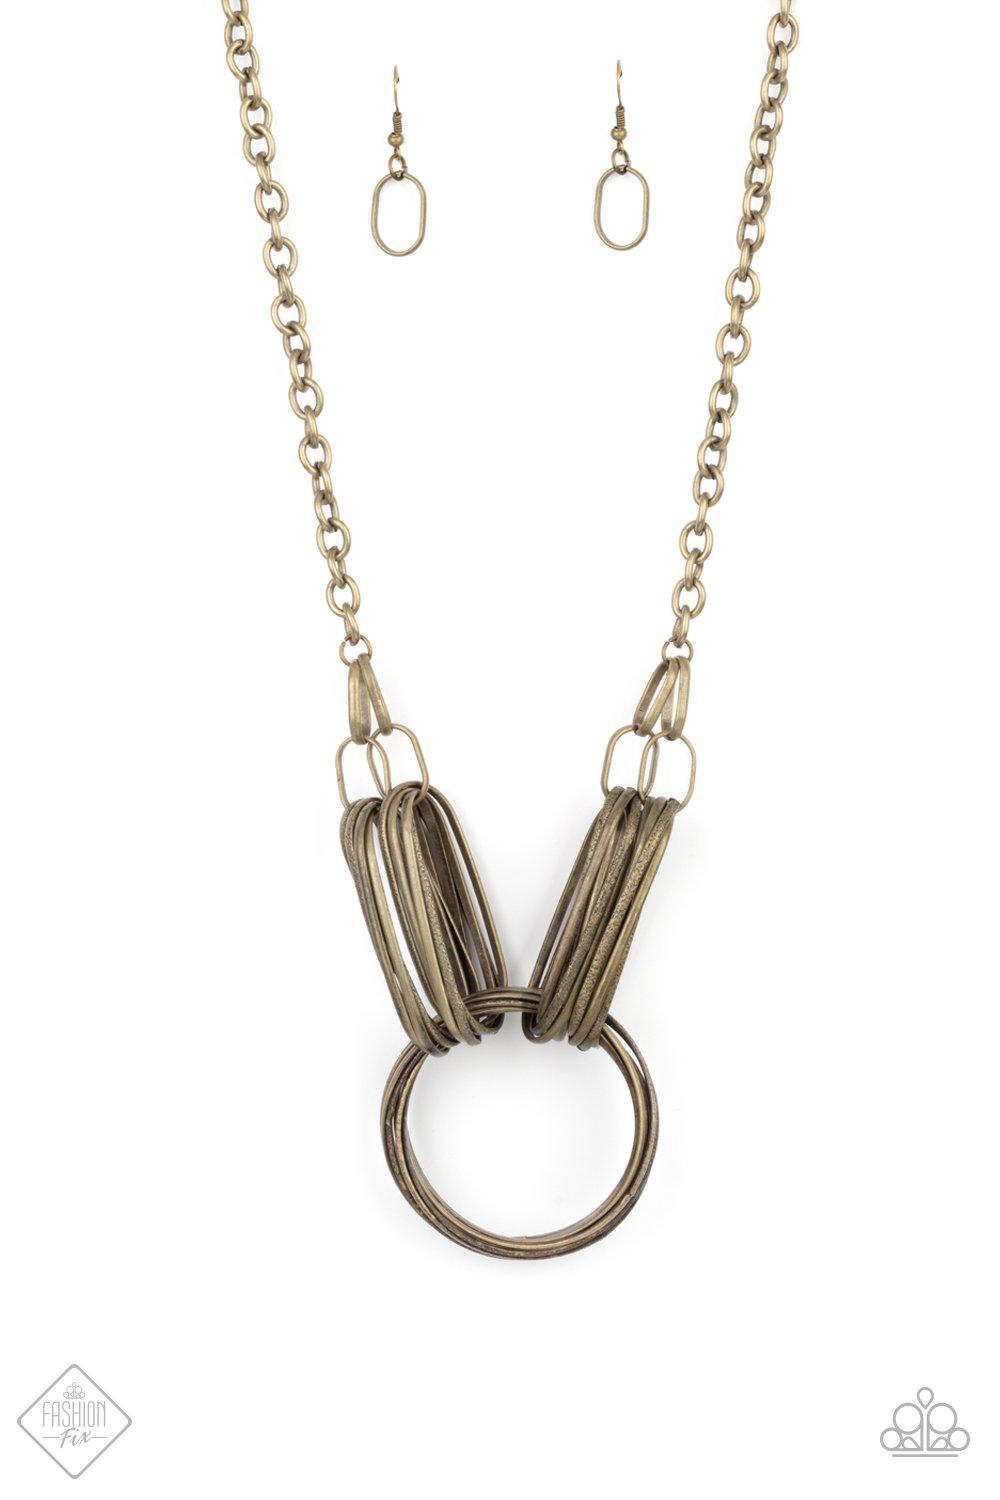 Lip Sync Links Brass Necklace - Paparazzi Accessories- lightbox - CarasShop.com - $5 Jewelry by Cara Jewels